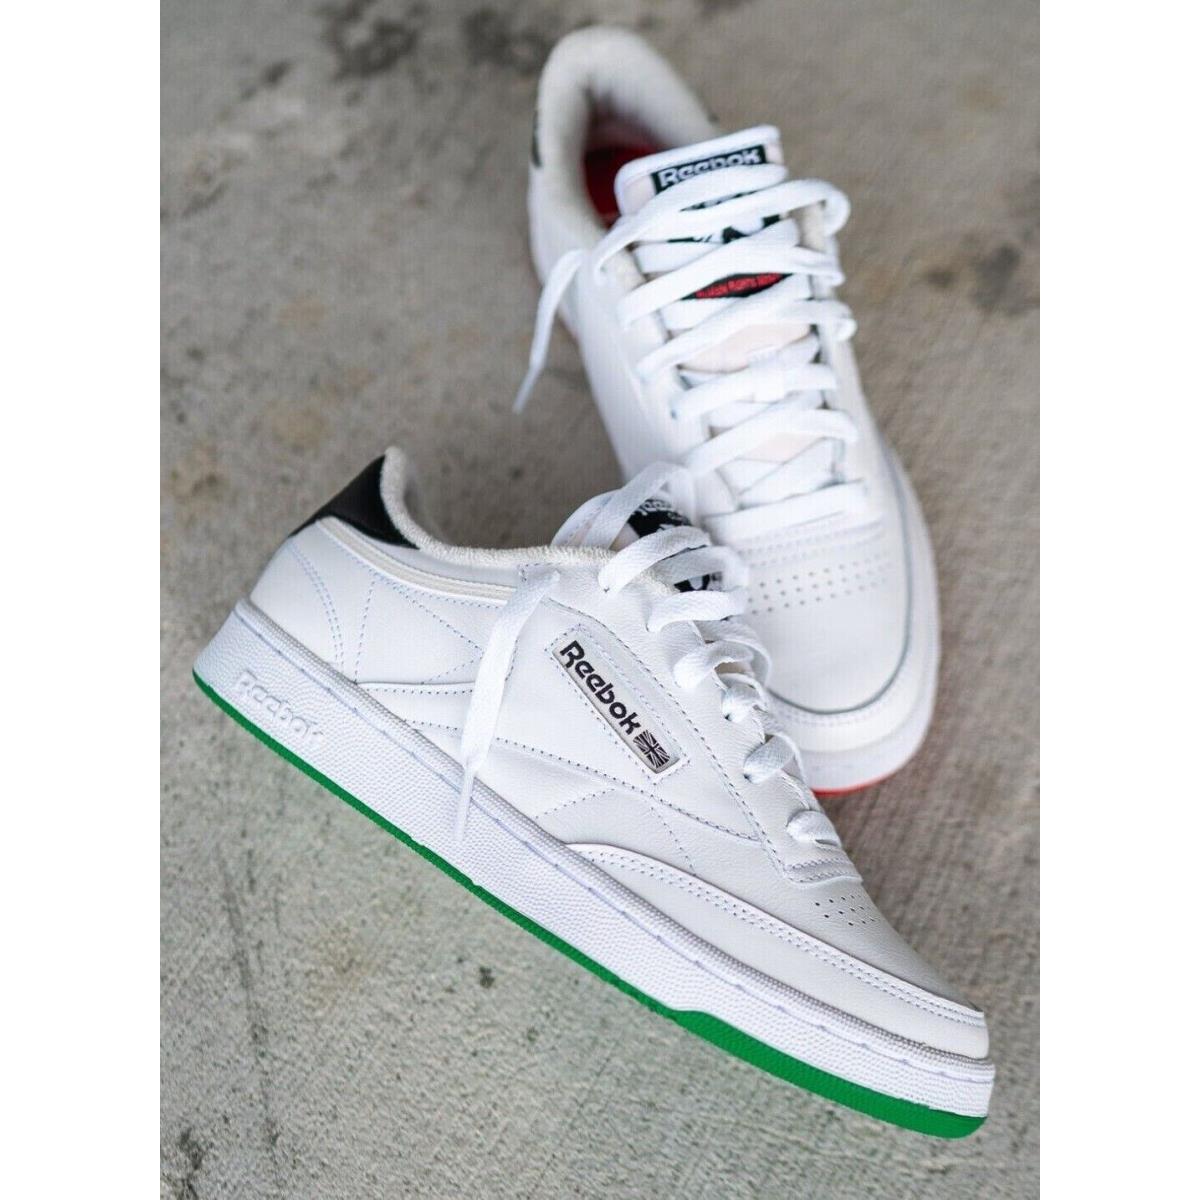 Reebok shoes  - Footwear White / Chalk White / Vector Red / Green 4